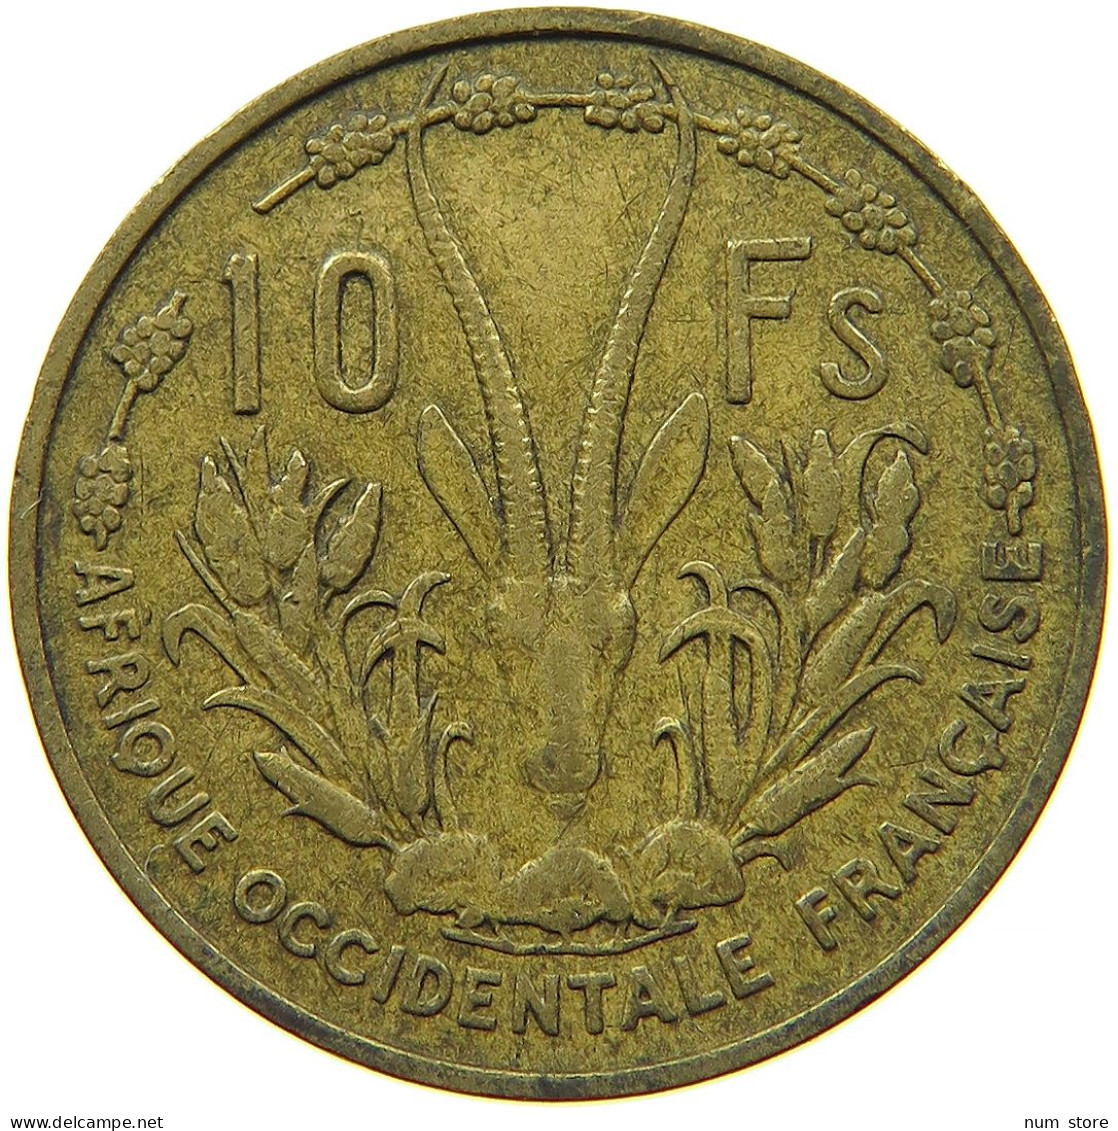 FRENCH WEST AFRICA 10 FRANCS 1956 #s089 0147 - French West Africa